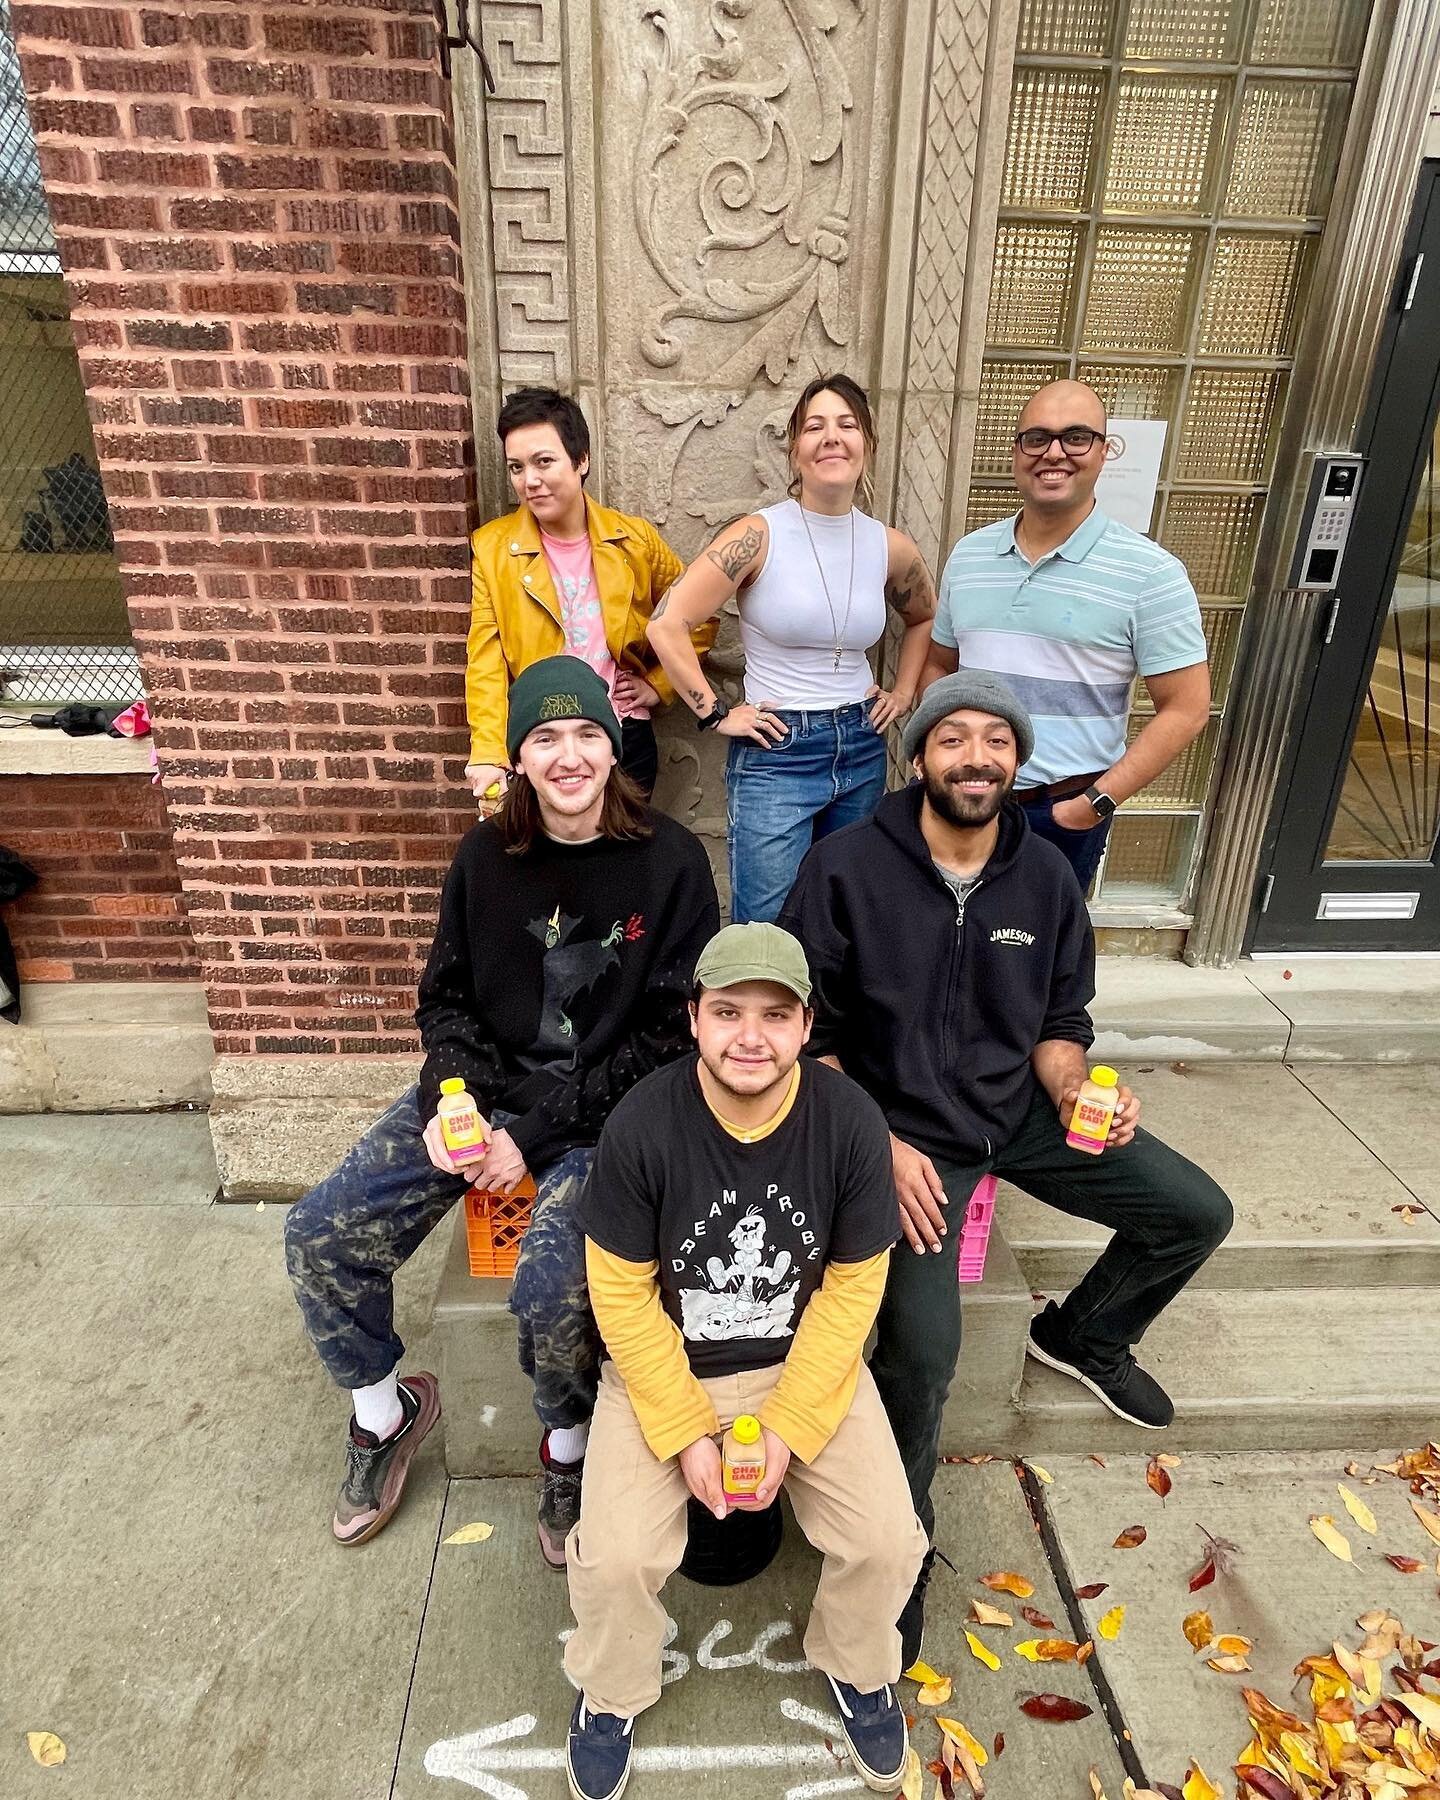 Hello from the Freeman House Team! 

We are Tanya, Joe, Jorge, Quintin, Sanchit, and Simone! Our little team works hard to bring fresh, from scratch, coffeeshop chai all over Chicago. 

Our journey started 10 years ago, brewing Chai&nbsp;behind the c